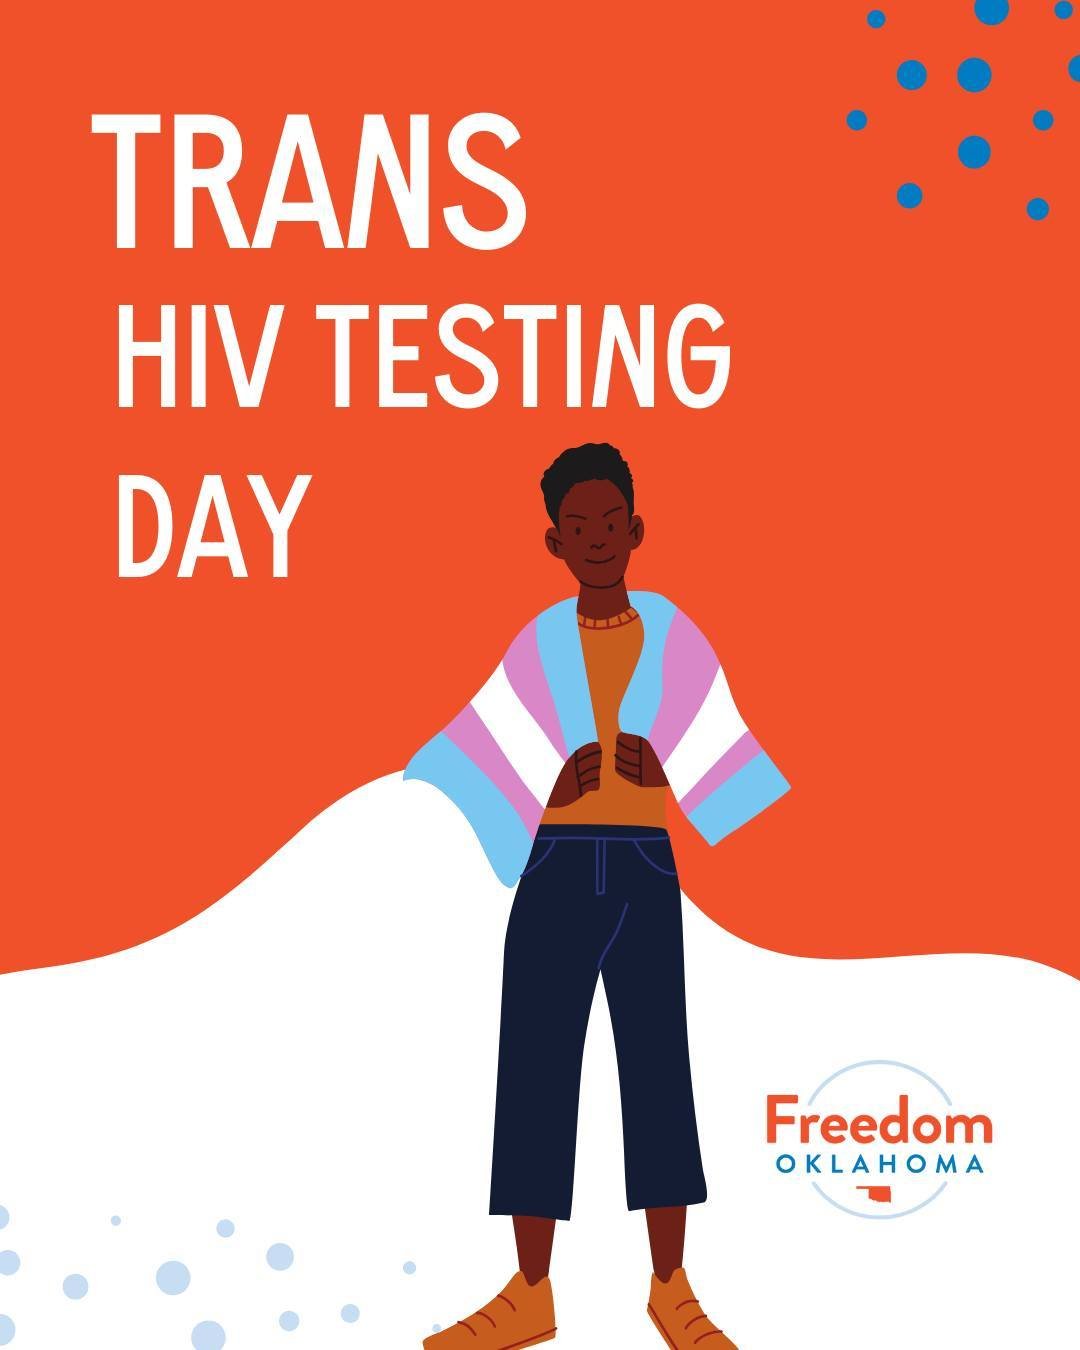 April 18 is National Transgender HIV Testing Day, a day to recognize the importance of routine HIV testing, status awareness, &amp; continued focus on HIV prevention &amp; treatment for transgender &amp; nonbinary people. https://bit.ly/3NuoGOh #Stop